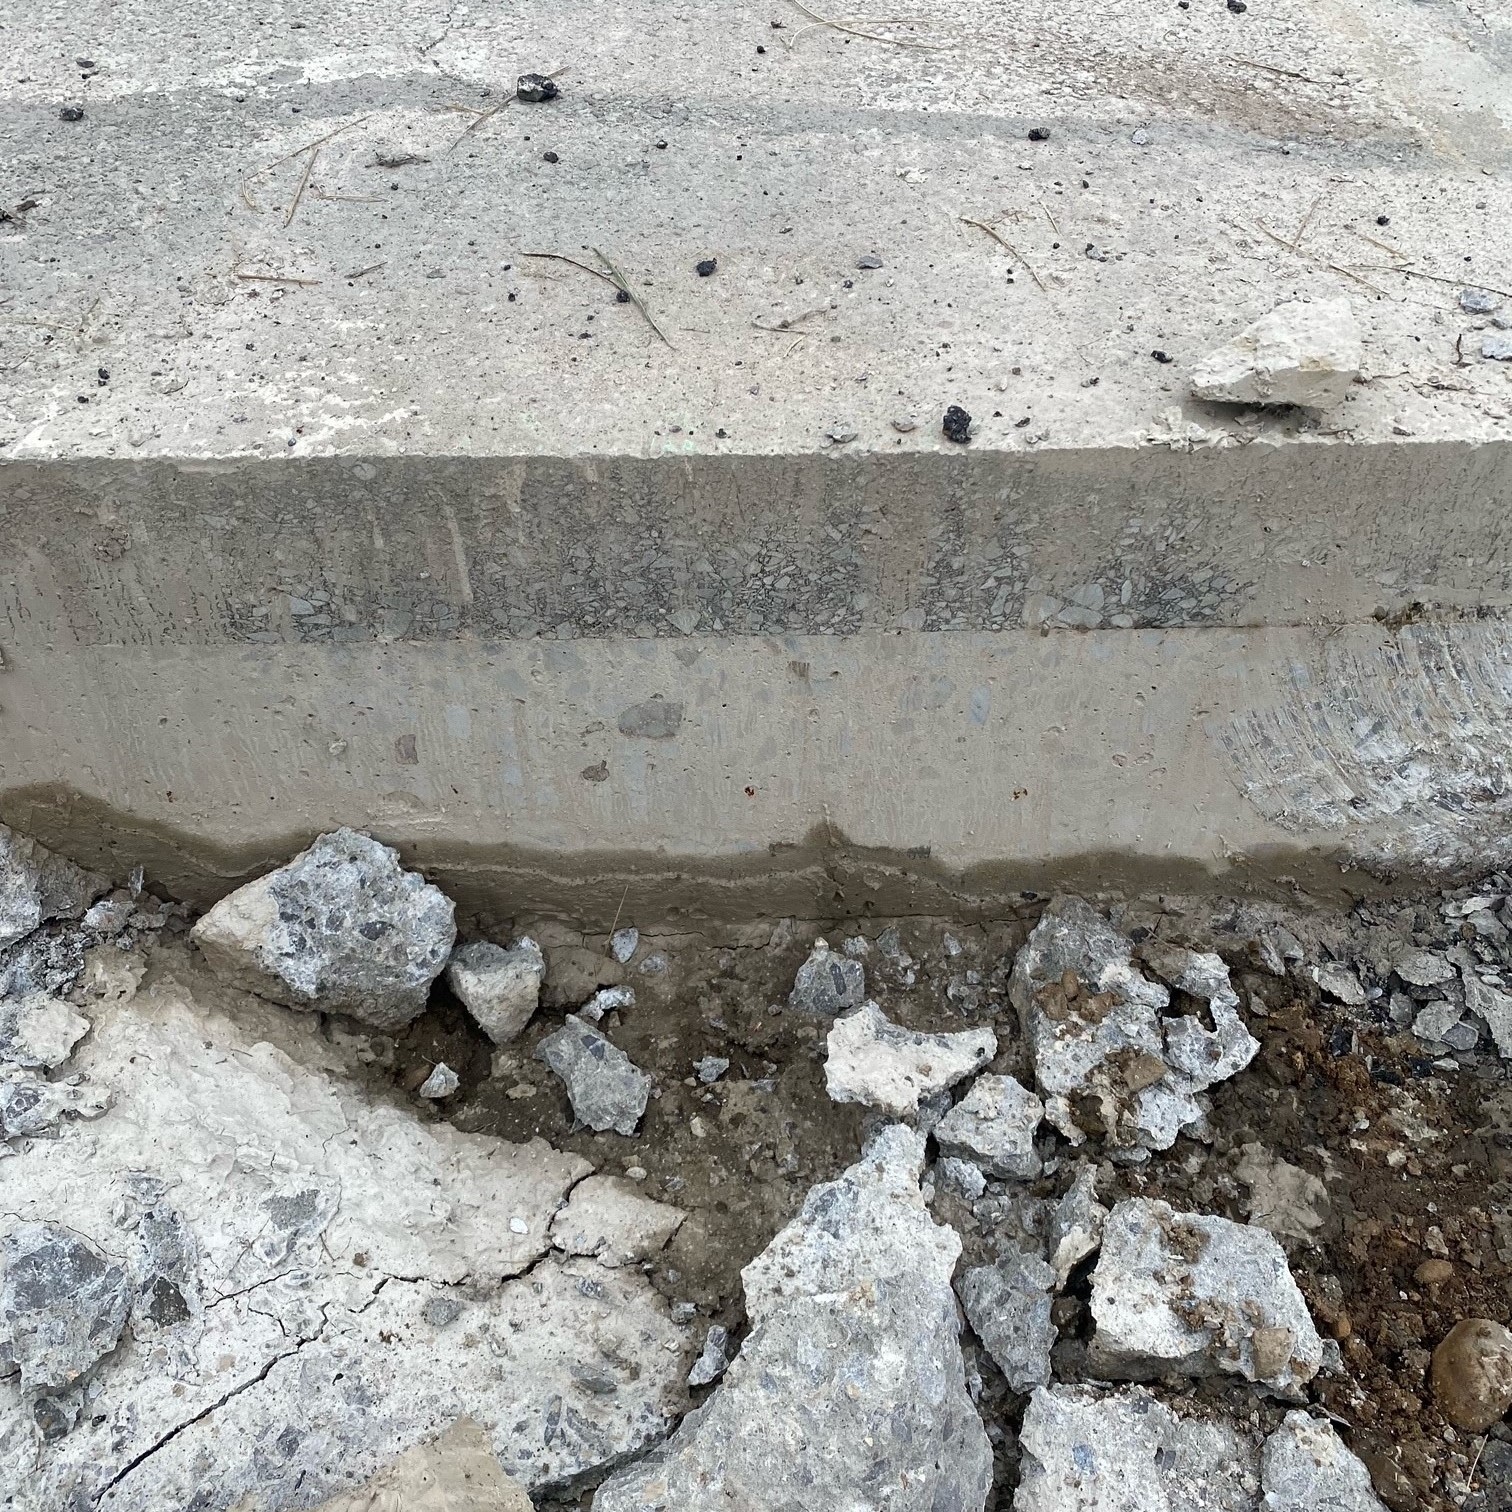 An image showing a close up look of the thin-bonded concrete overlay on an existing pavement